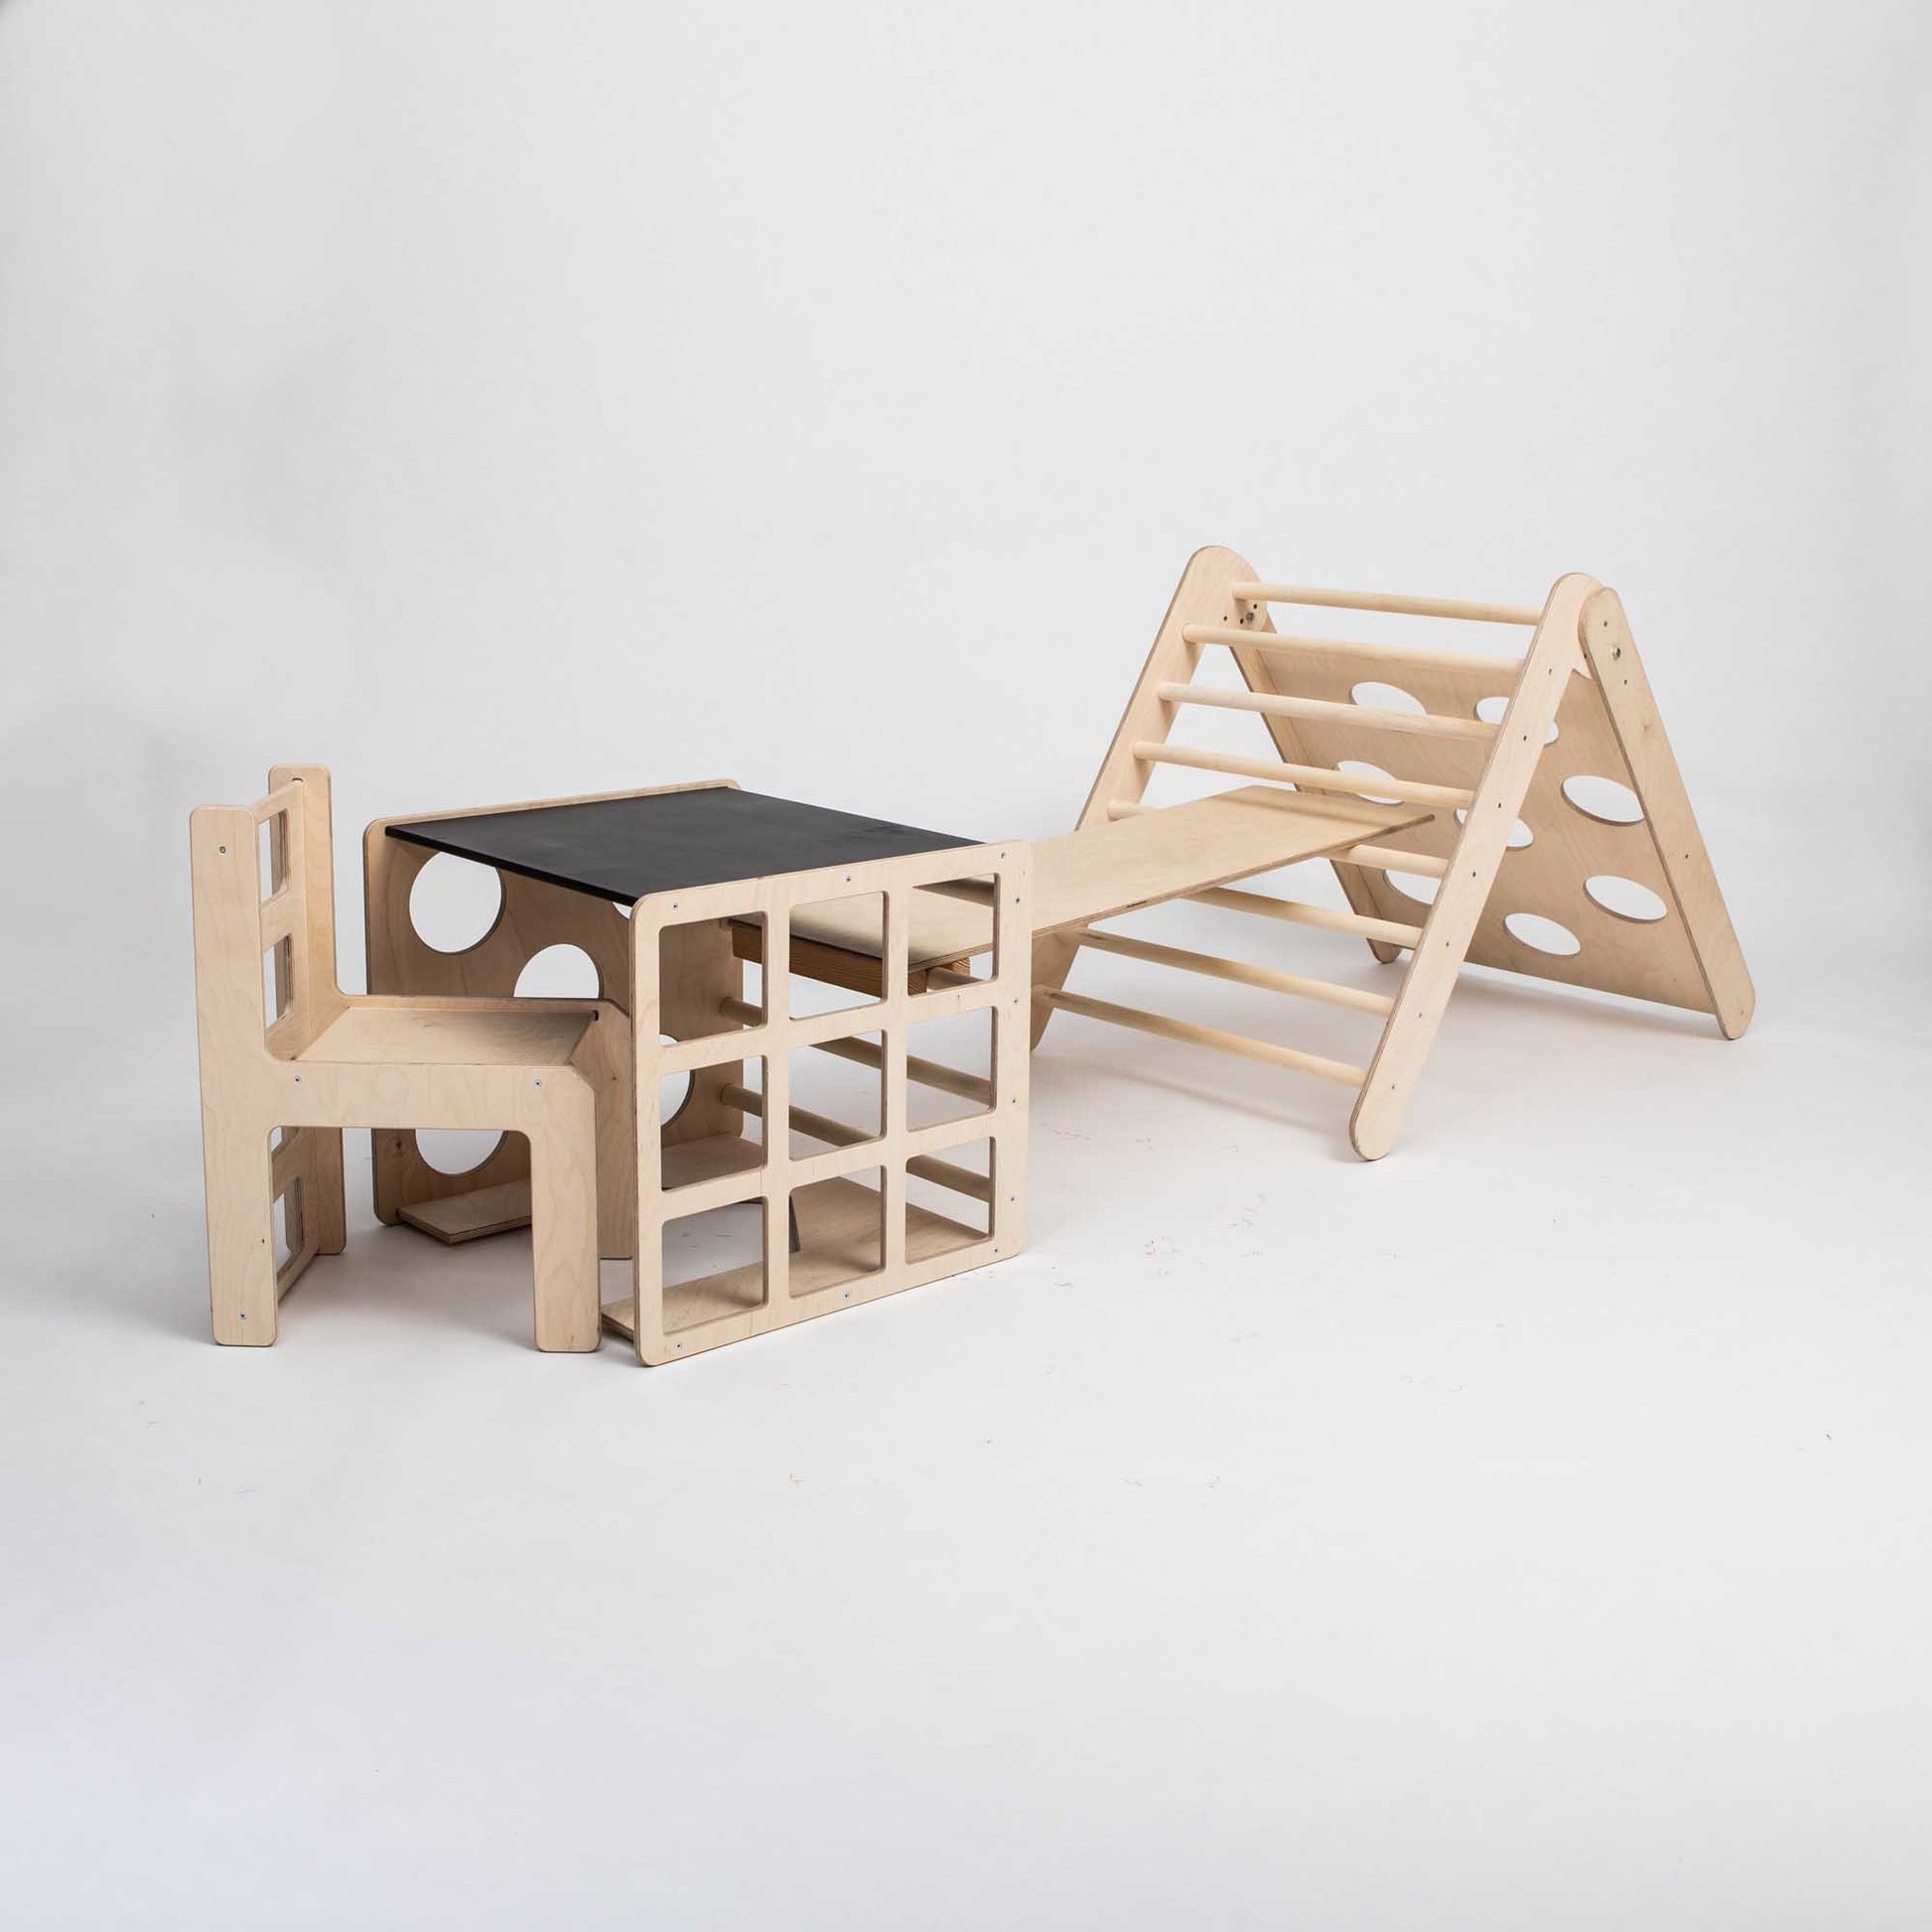 A Transformable triangle + climbing cube / table and chair  + a ramp with climbing fun and a chair.